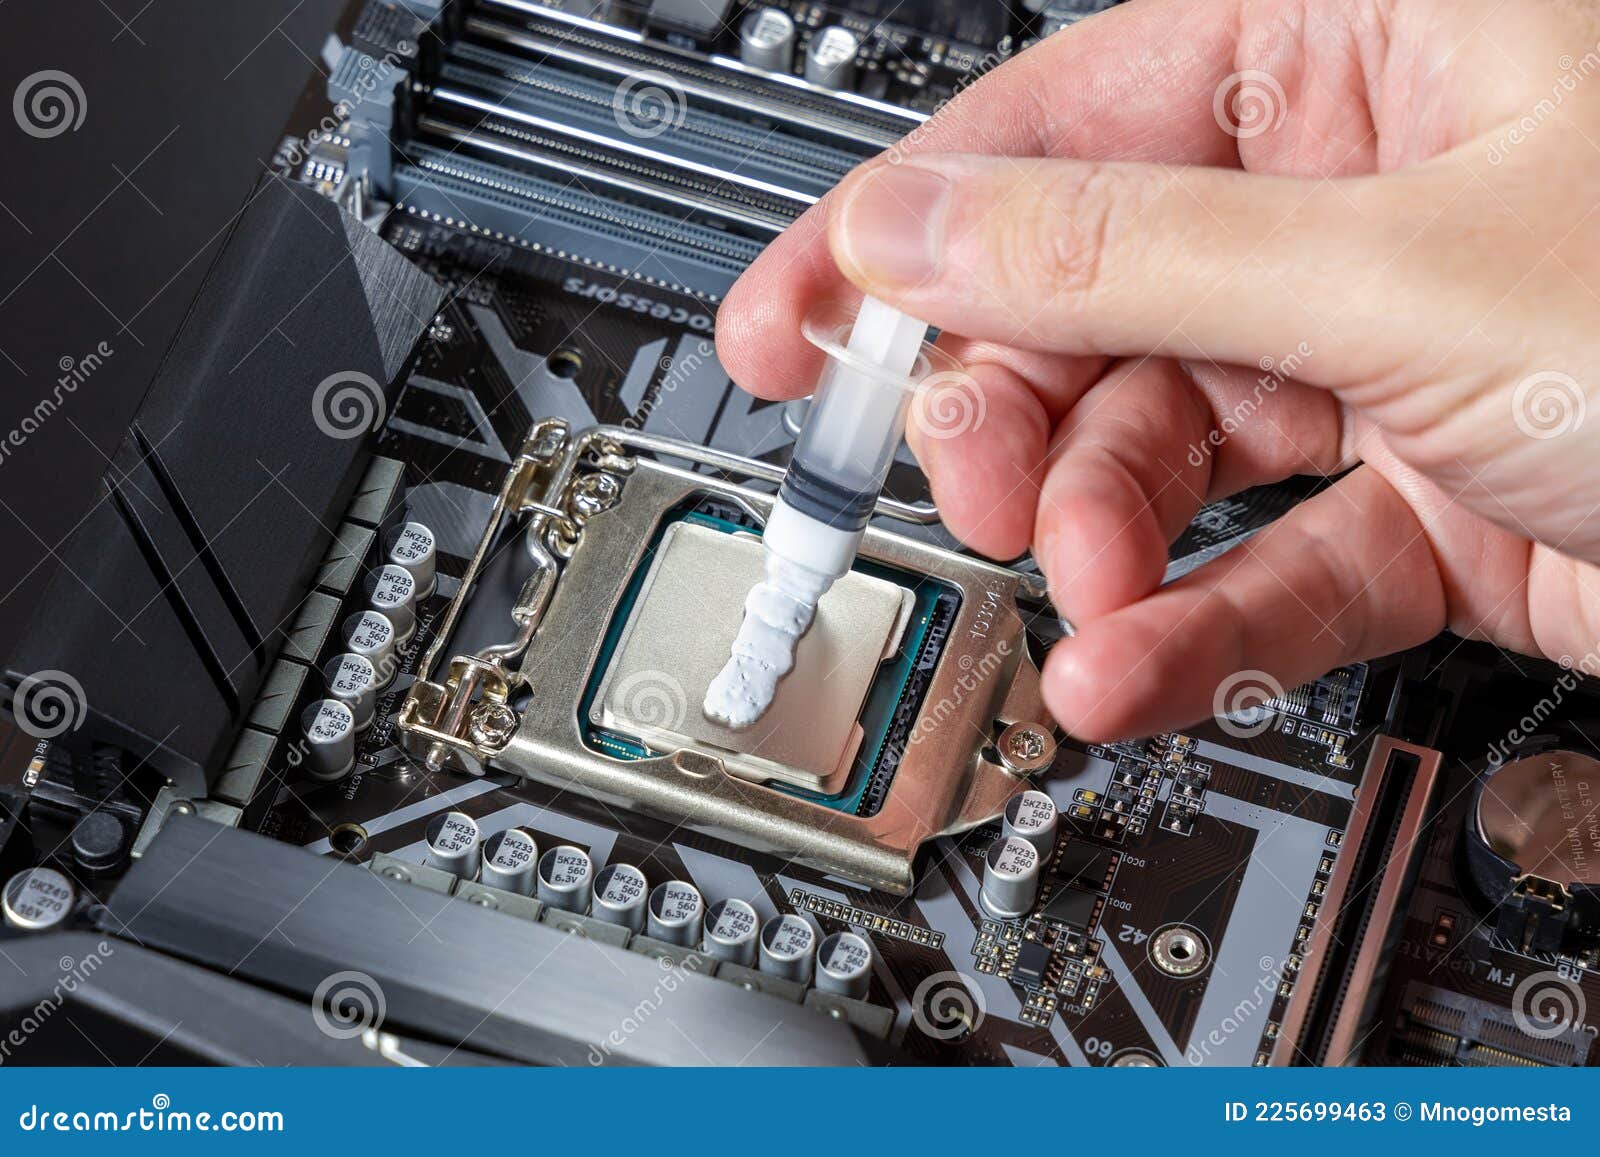 How to apply thermal paste to a CPU